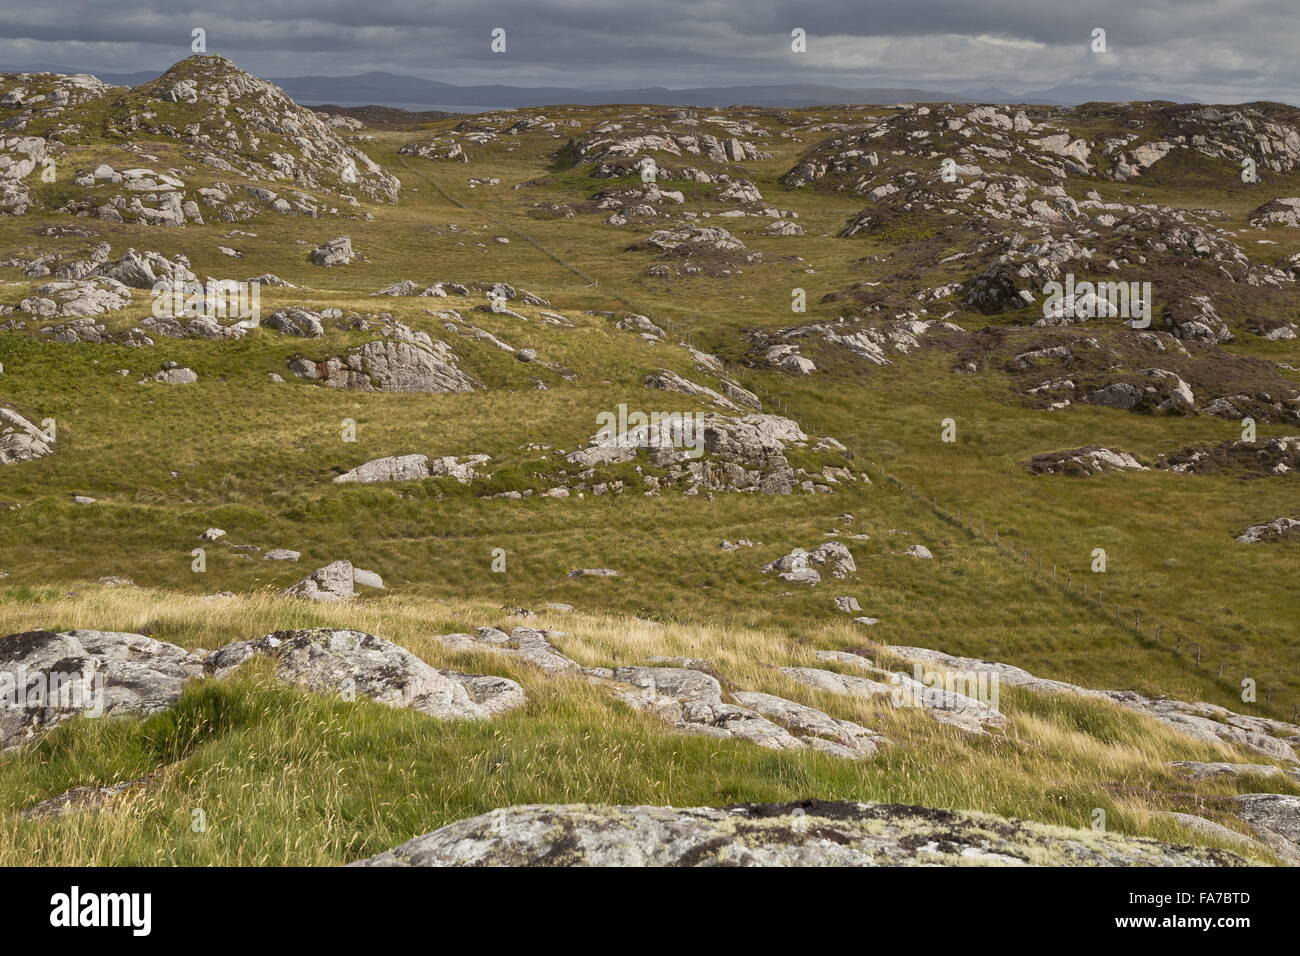 The wild glaciated Lewisian Gneiss countryside of northern Coll, Inner Hebrides, Scotland. Stock Photo